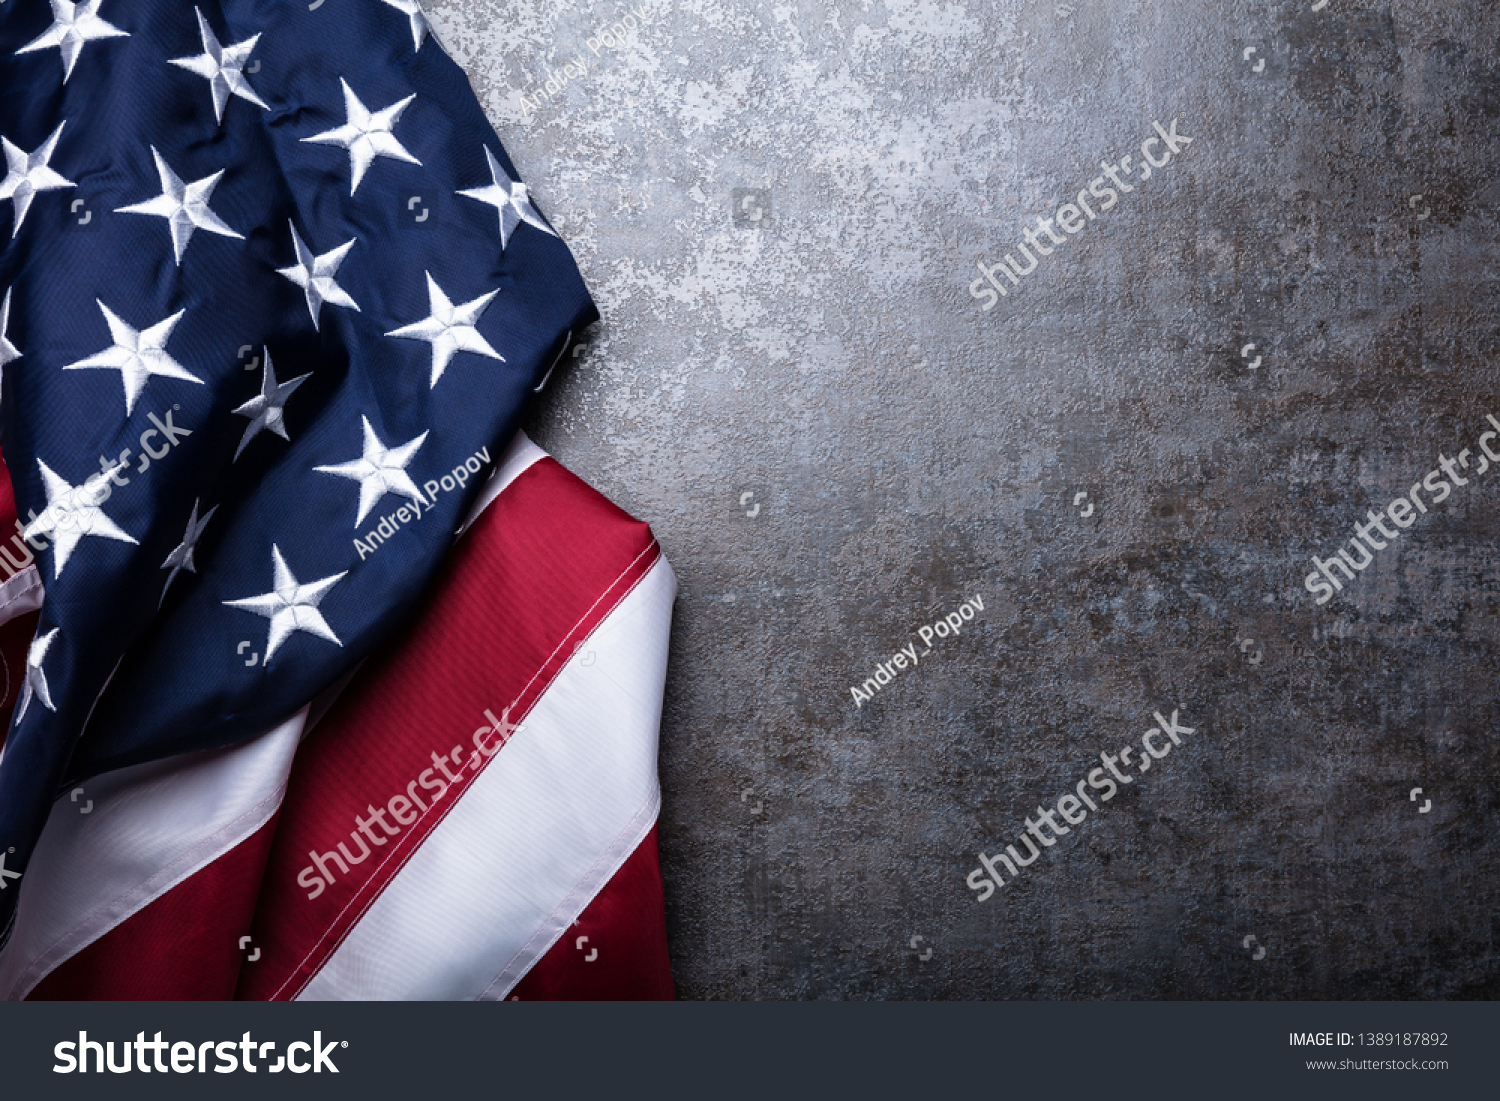 An Overhead View Of American Flag On Dark Concrete Background #1389187892